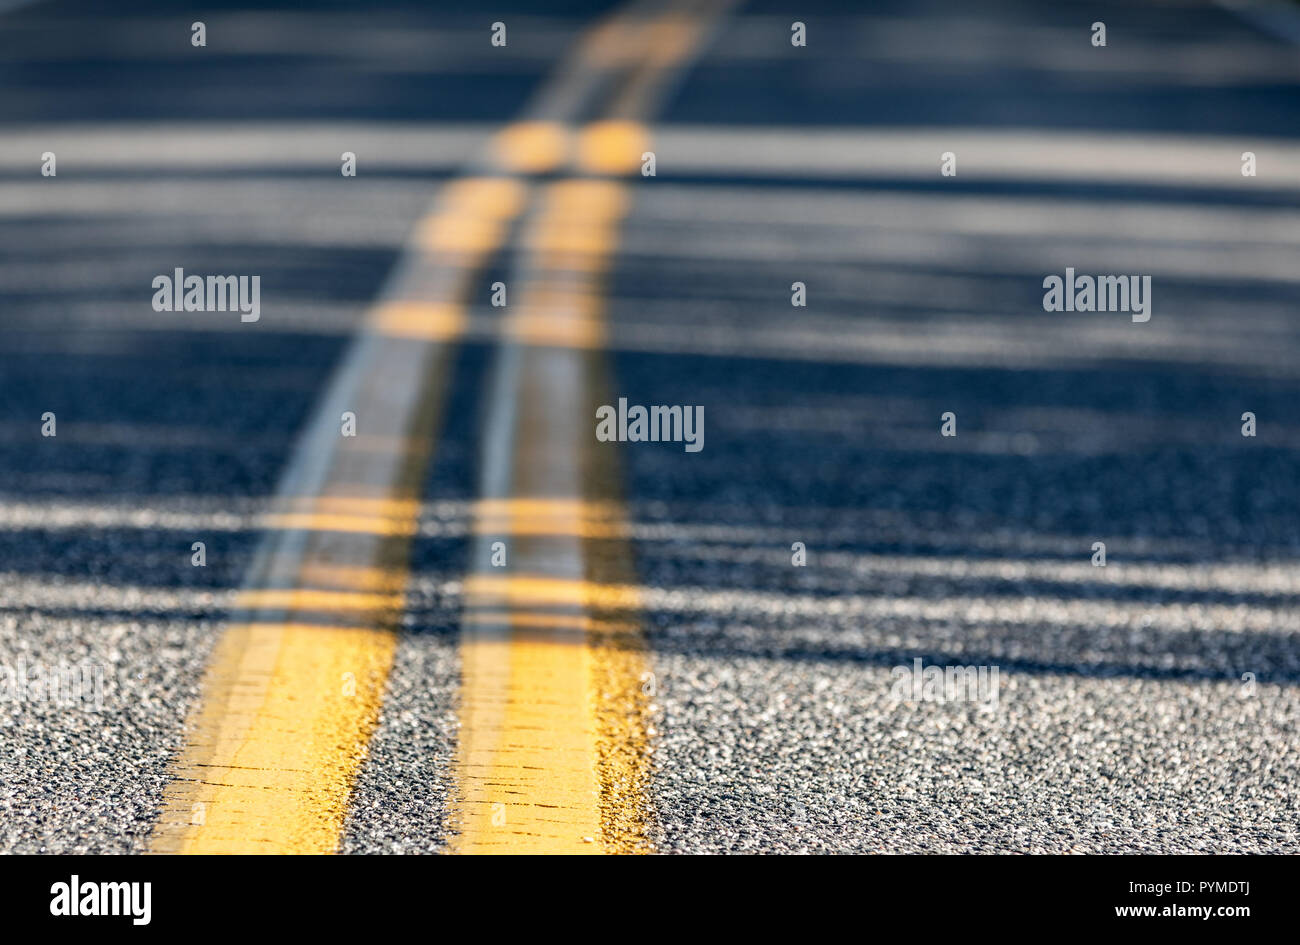 close up of a double yellow line on a asphalt road Stock Photo